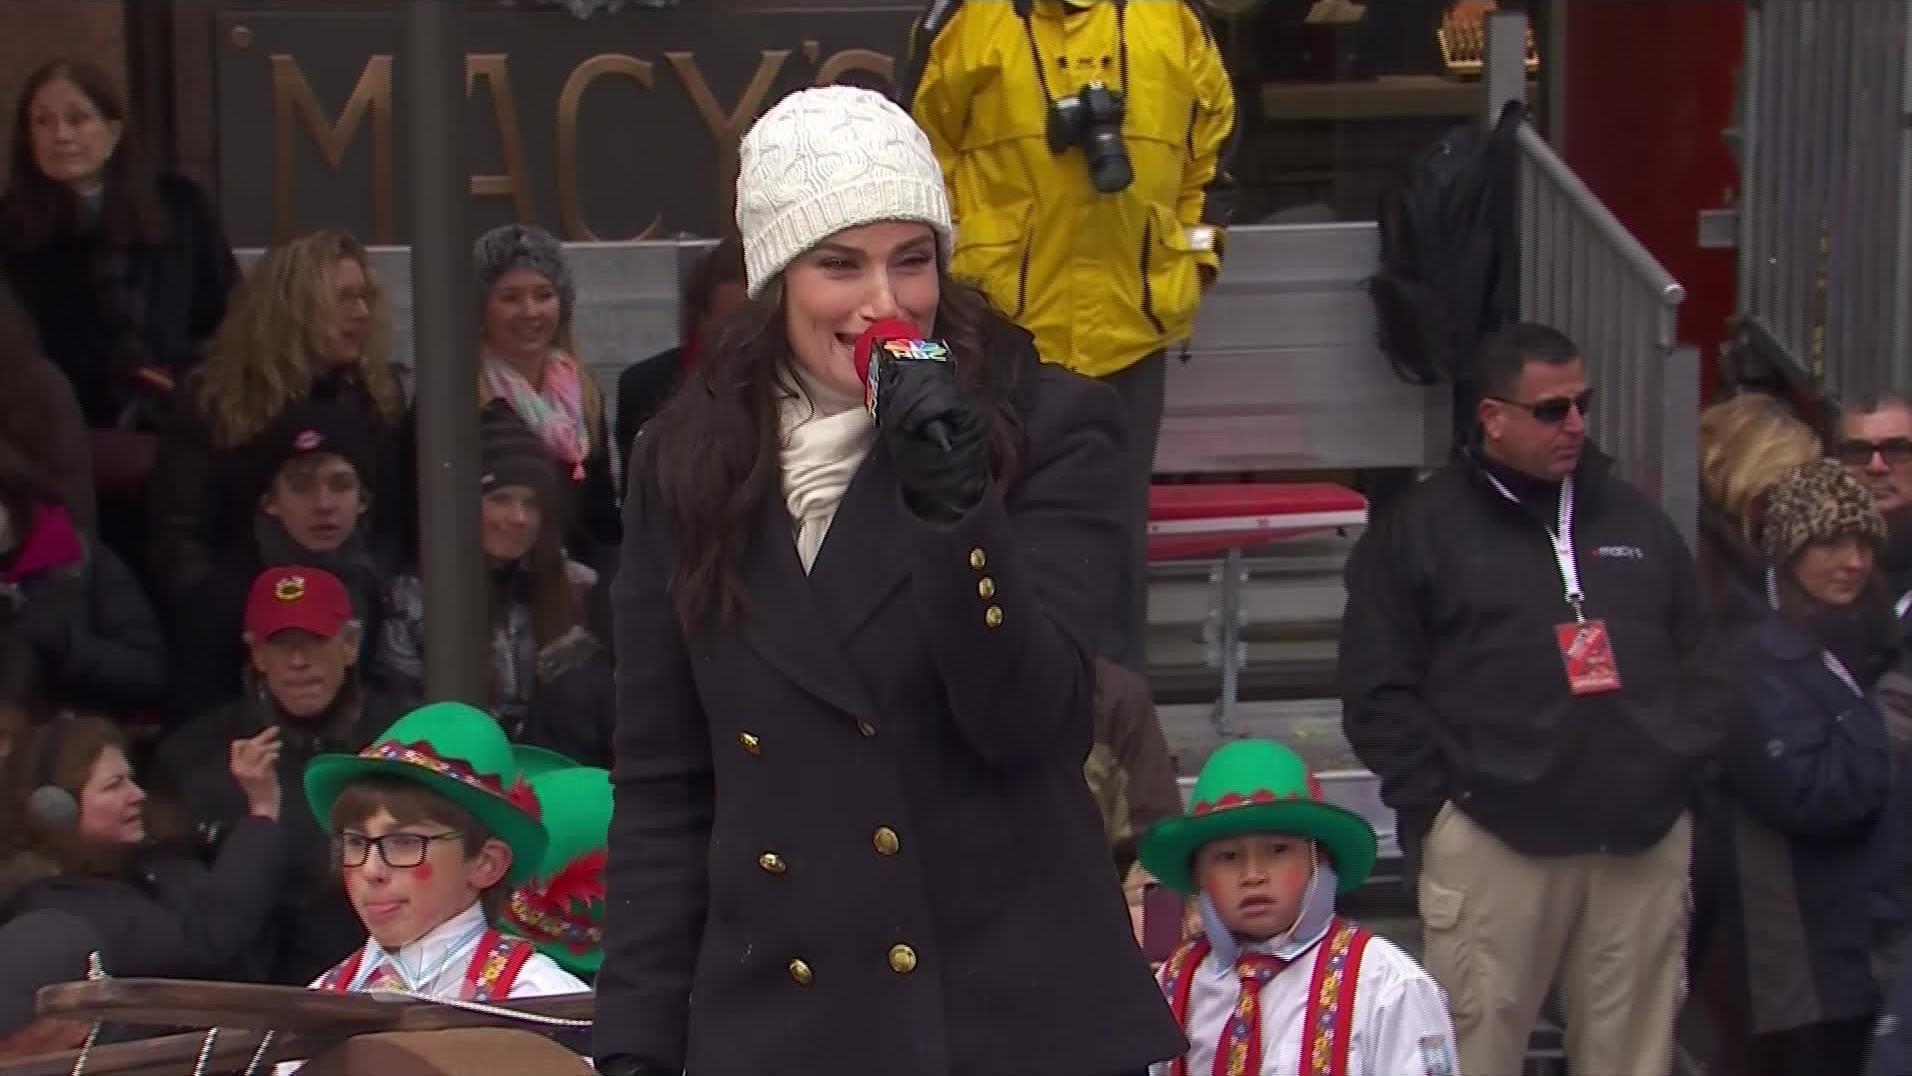 Idina Menzel - All I Want For Christmas Is You (Macy's Thanksgiving Day Parade)